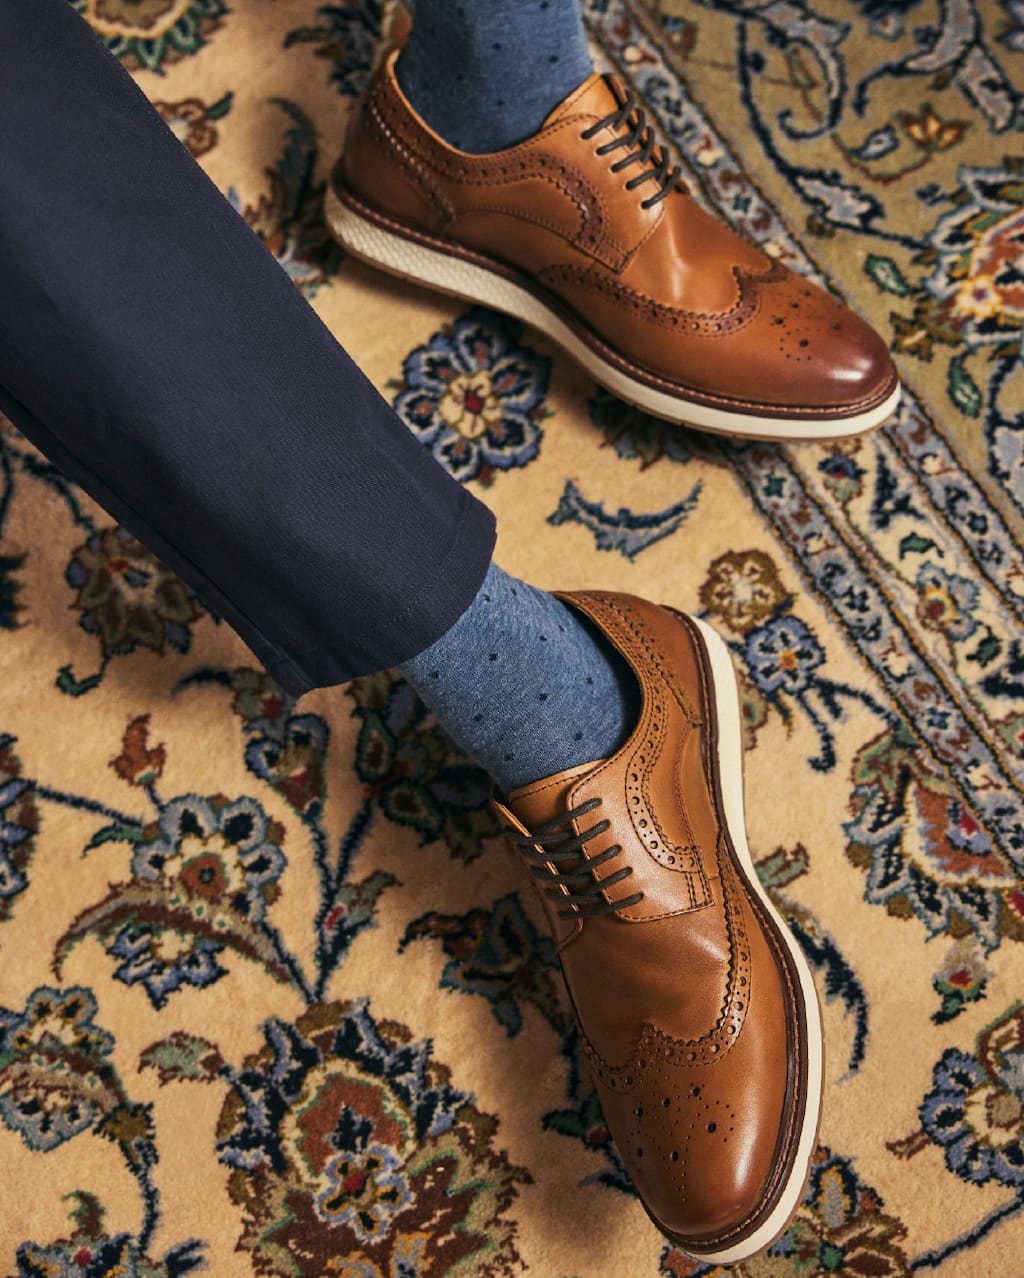 20 best dress shoes for wide feet - TODAY